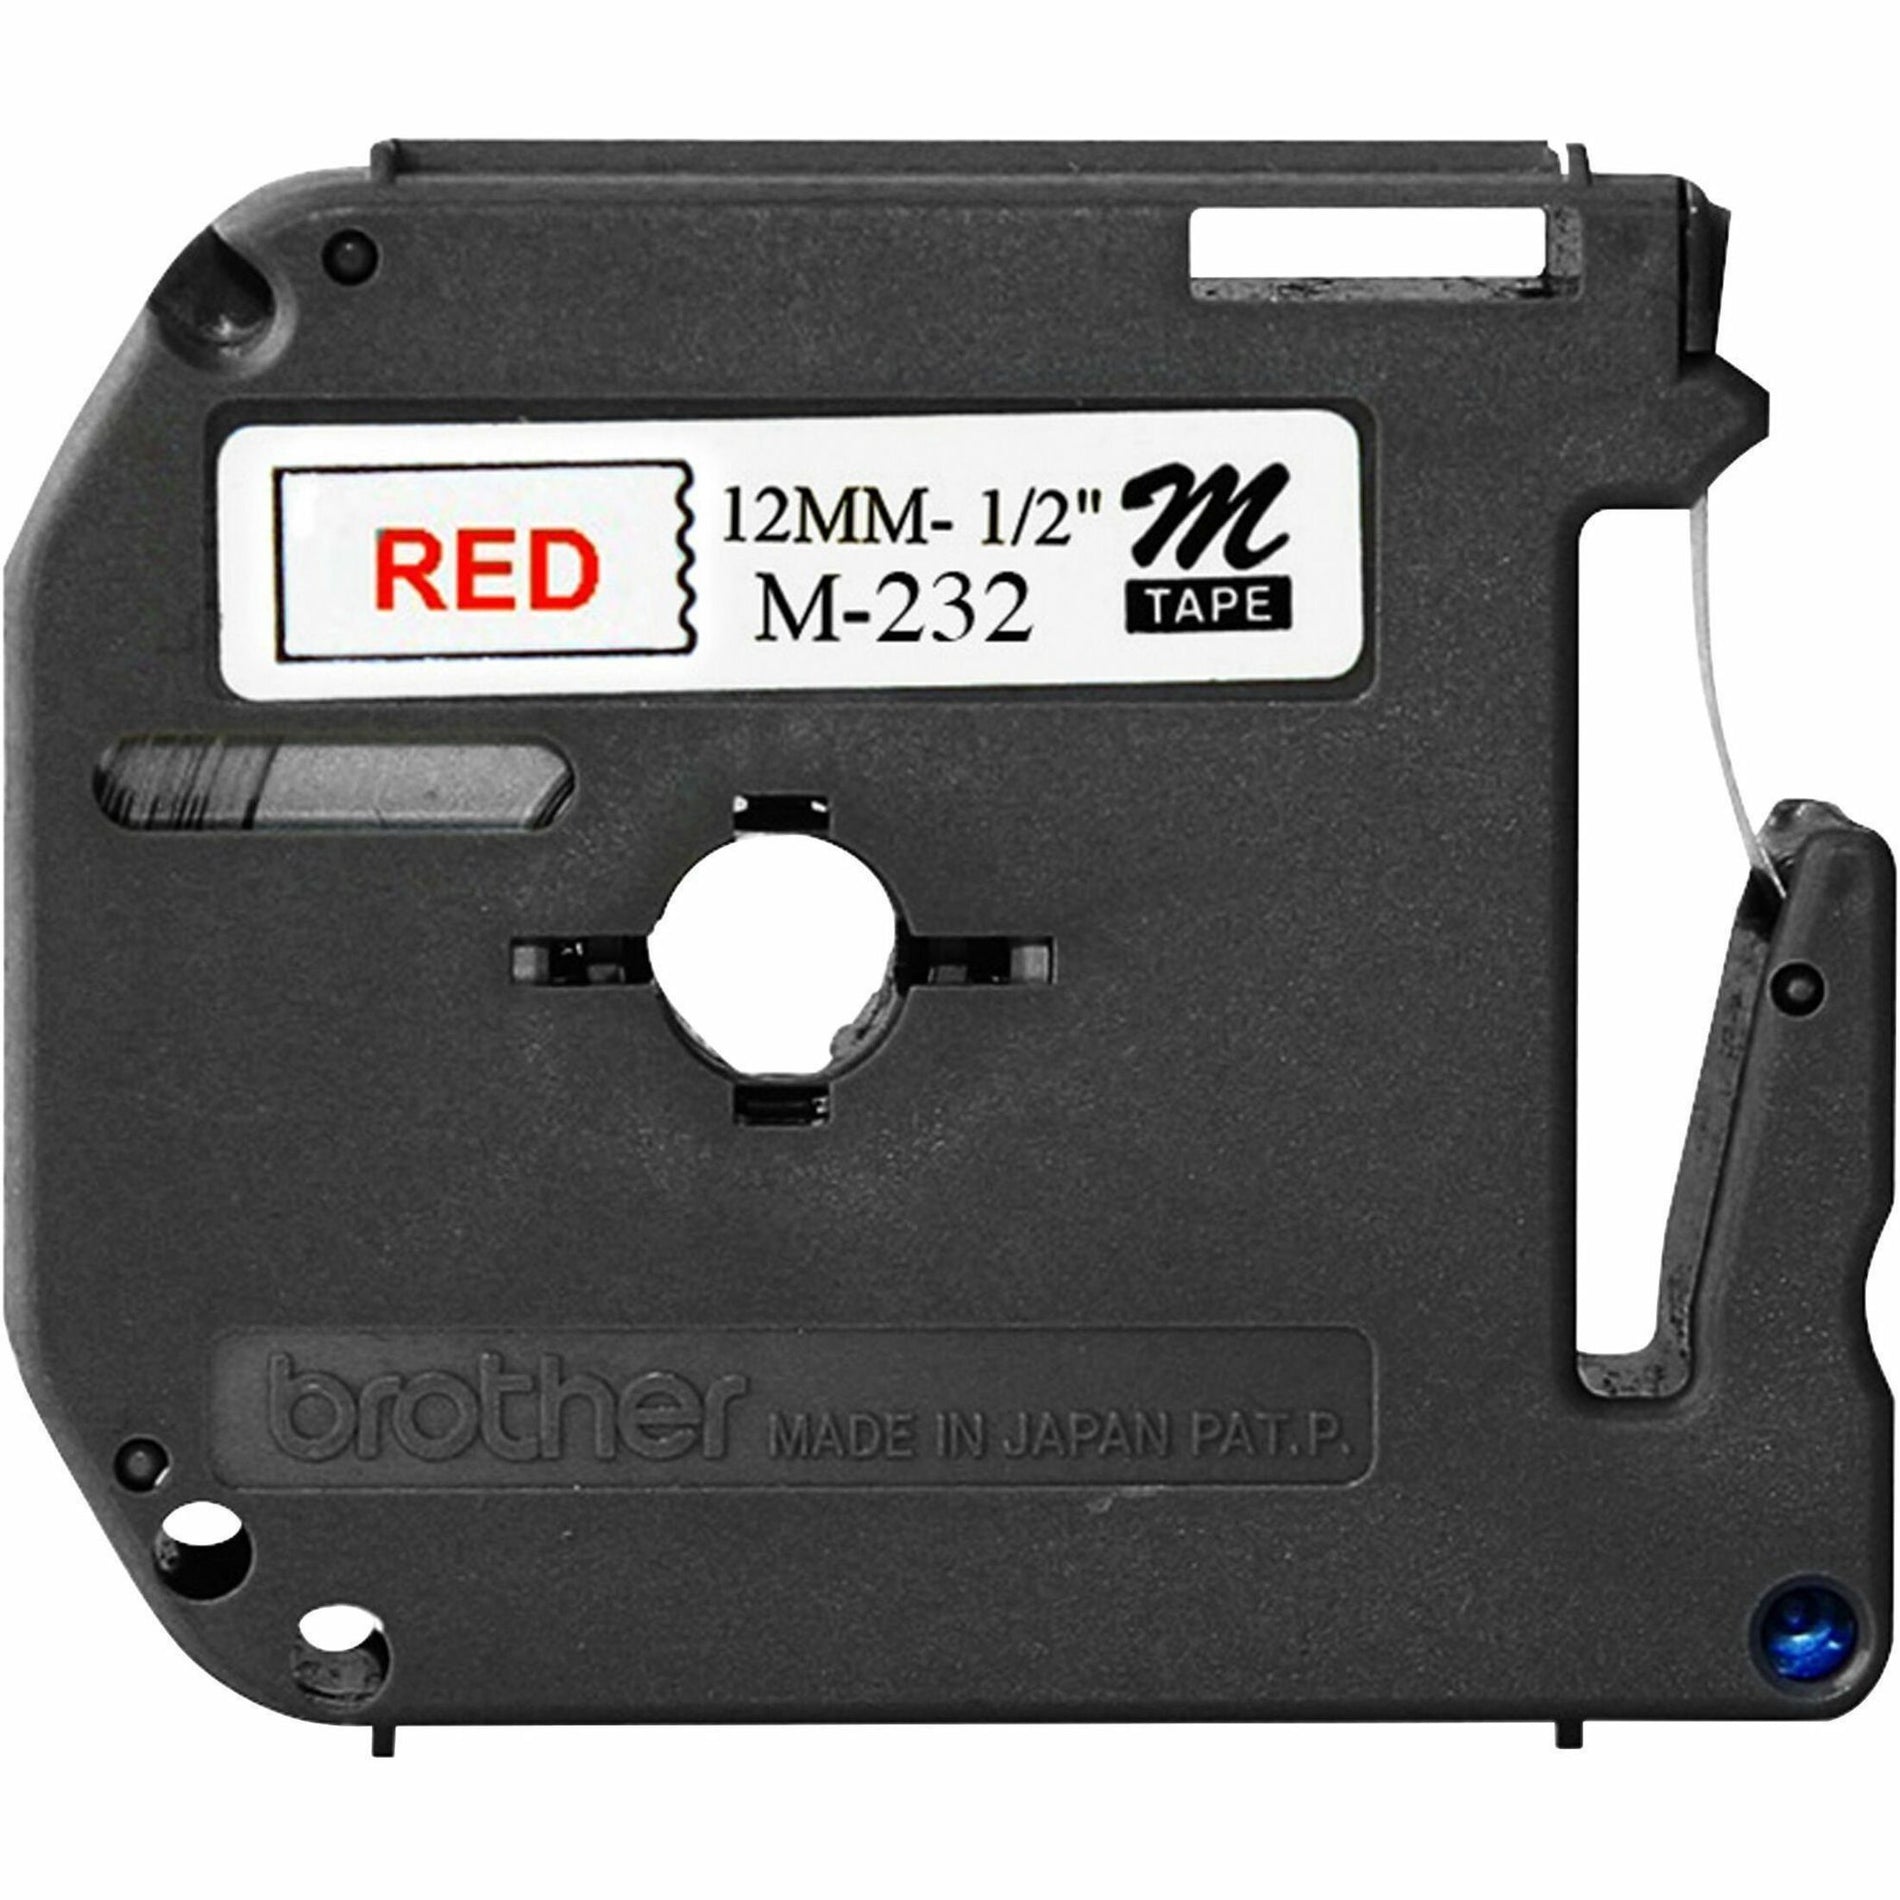 Brother MK232 P-touch Nonlaminated Label Tape, 1/2" Size, Red/White